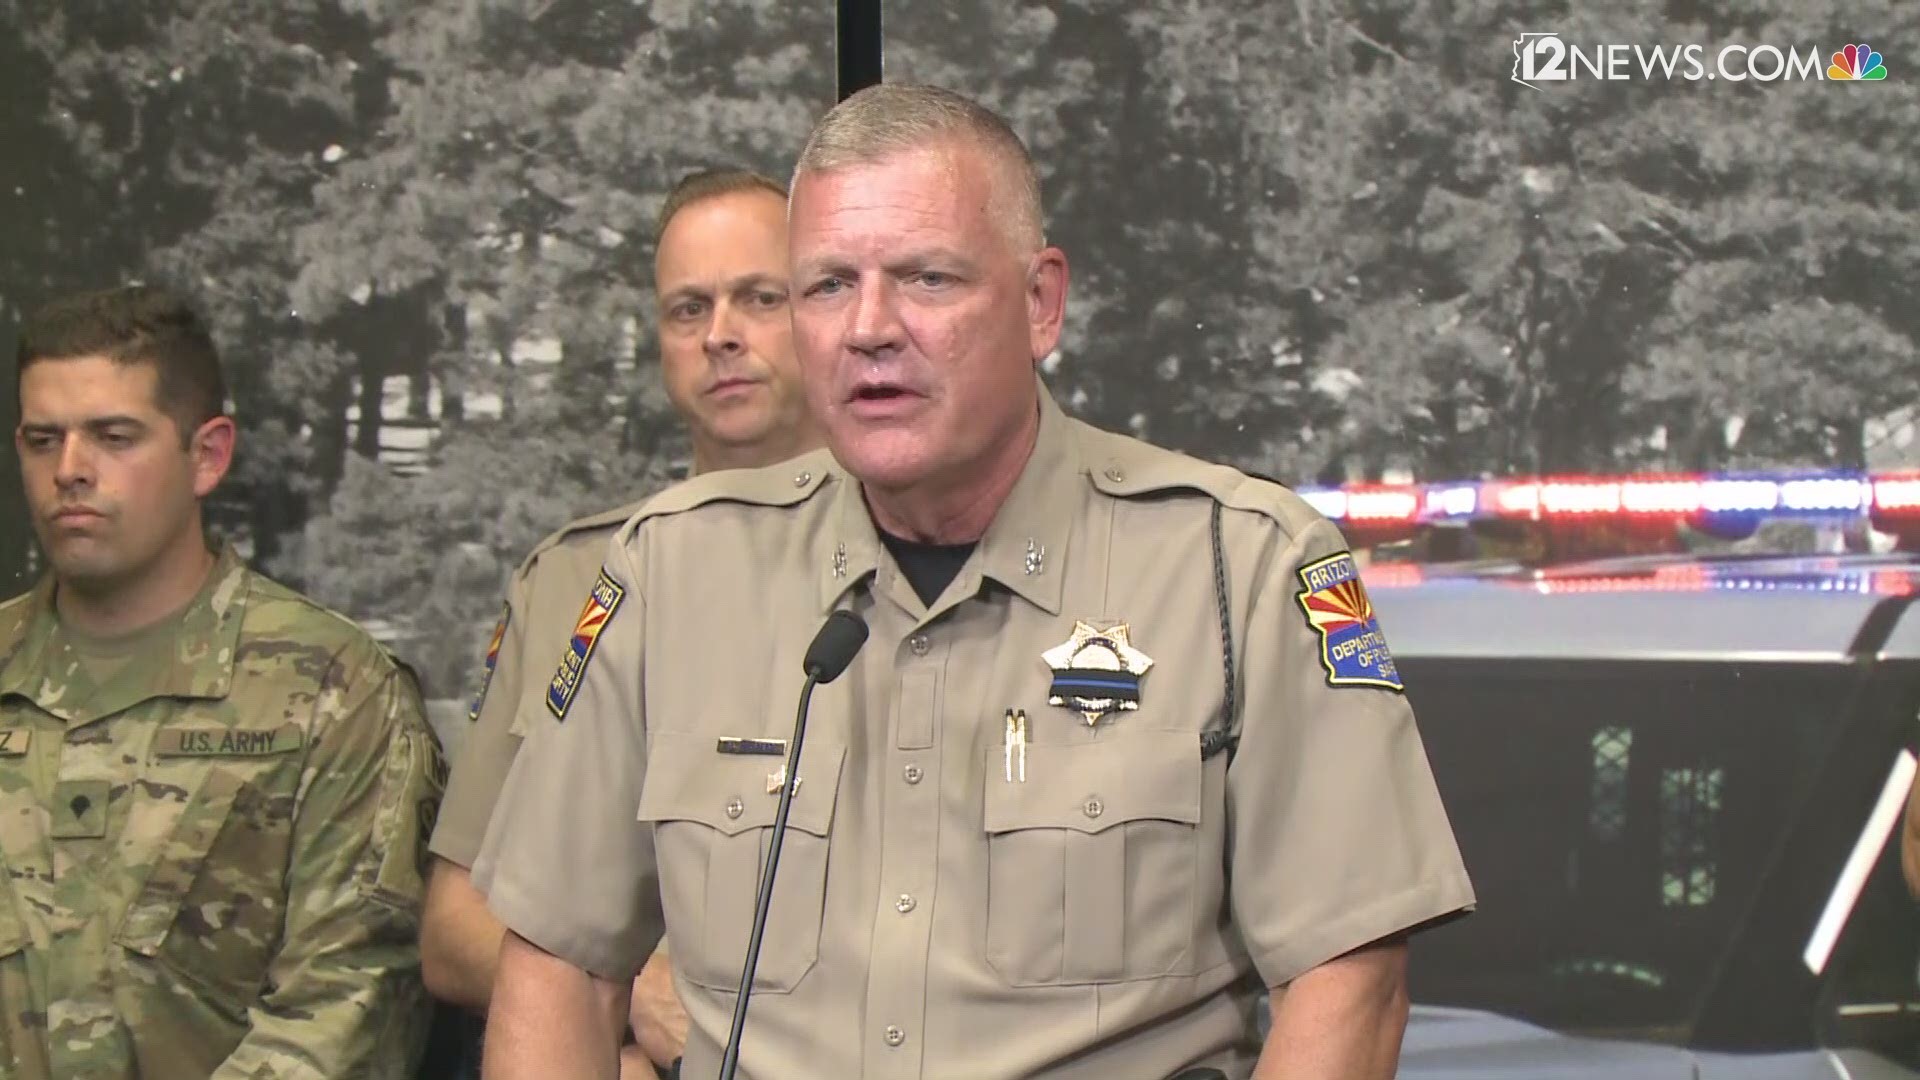 DPS director Col. Frank Milstead spoke about the hard work and dedication all law enforcement contribute at a press conference today on the death of Arizona Department of Public Safety trooper Tyler Edenhofer.